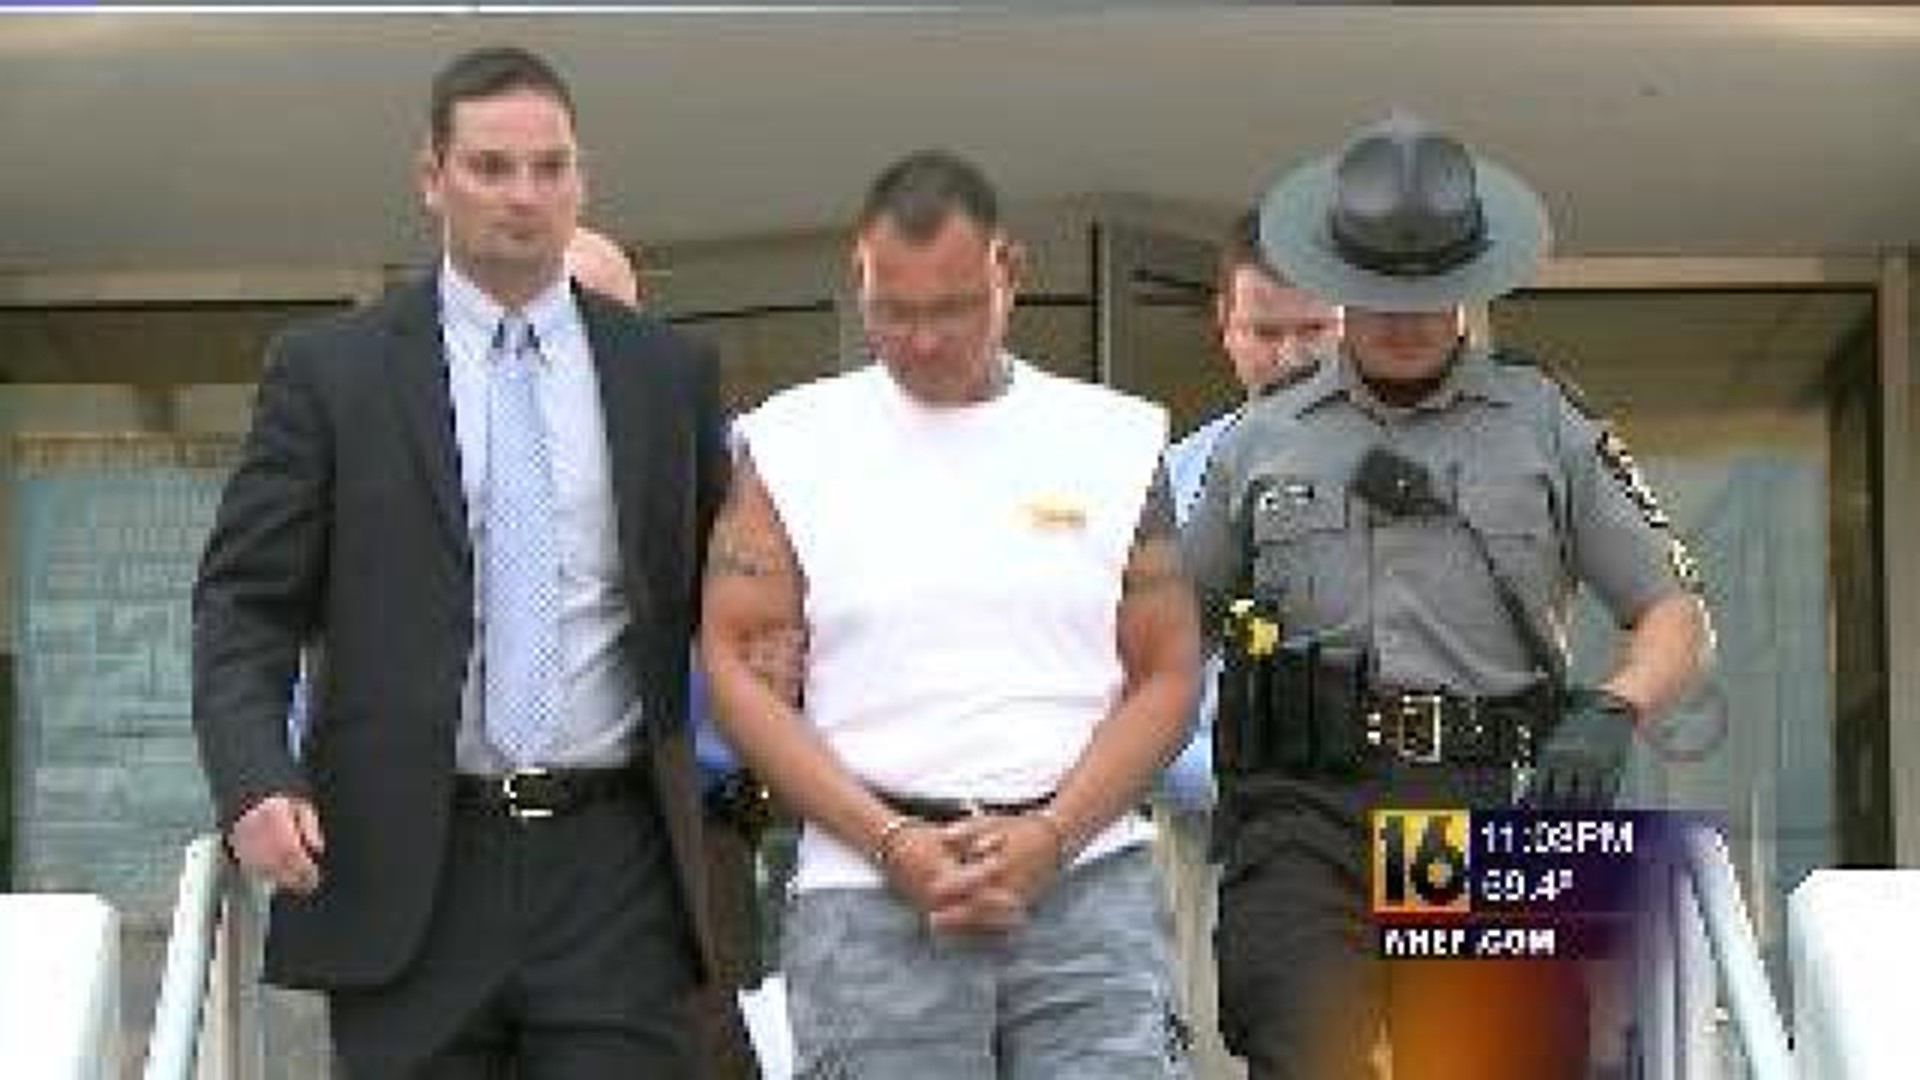 Old Forge Police Chief Arrested